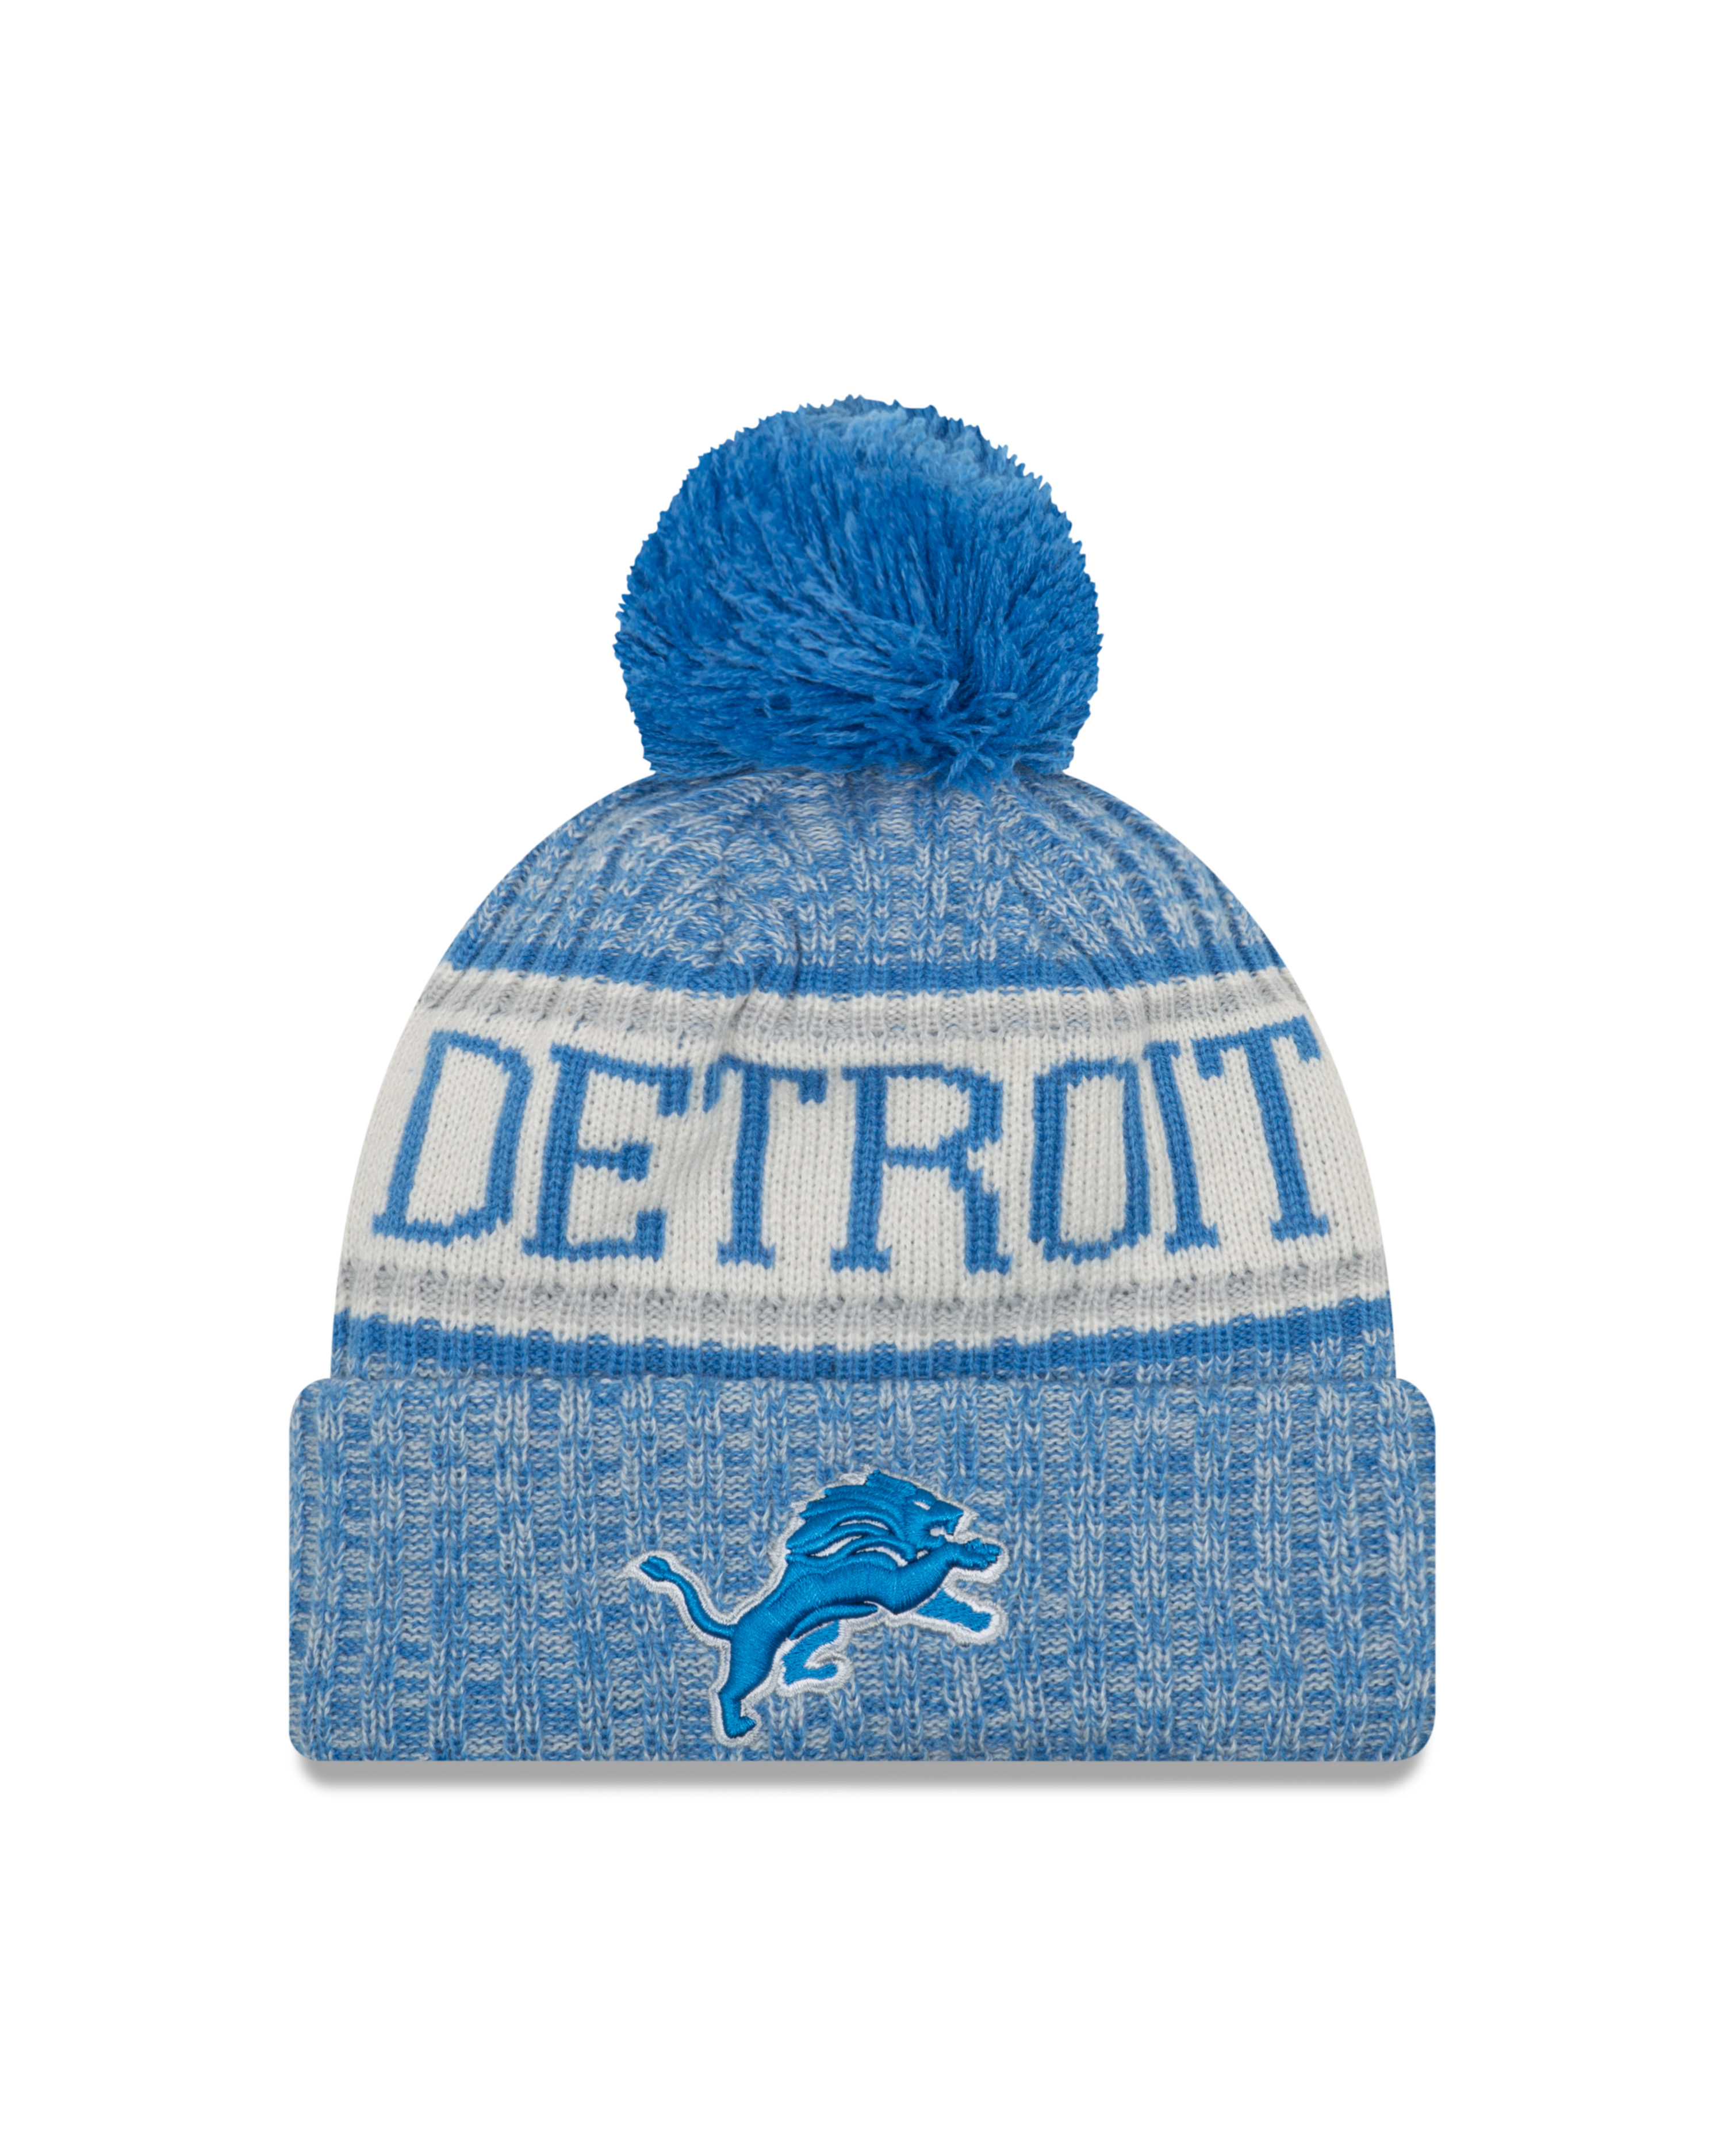 New Era Official NFL Cold Weather Collection #53